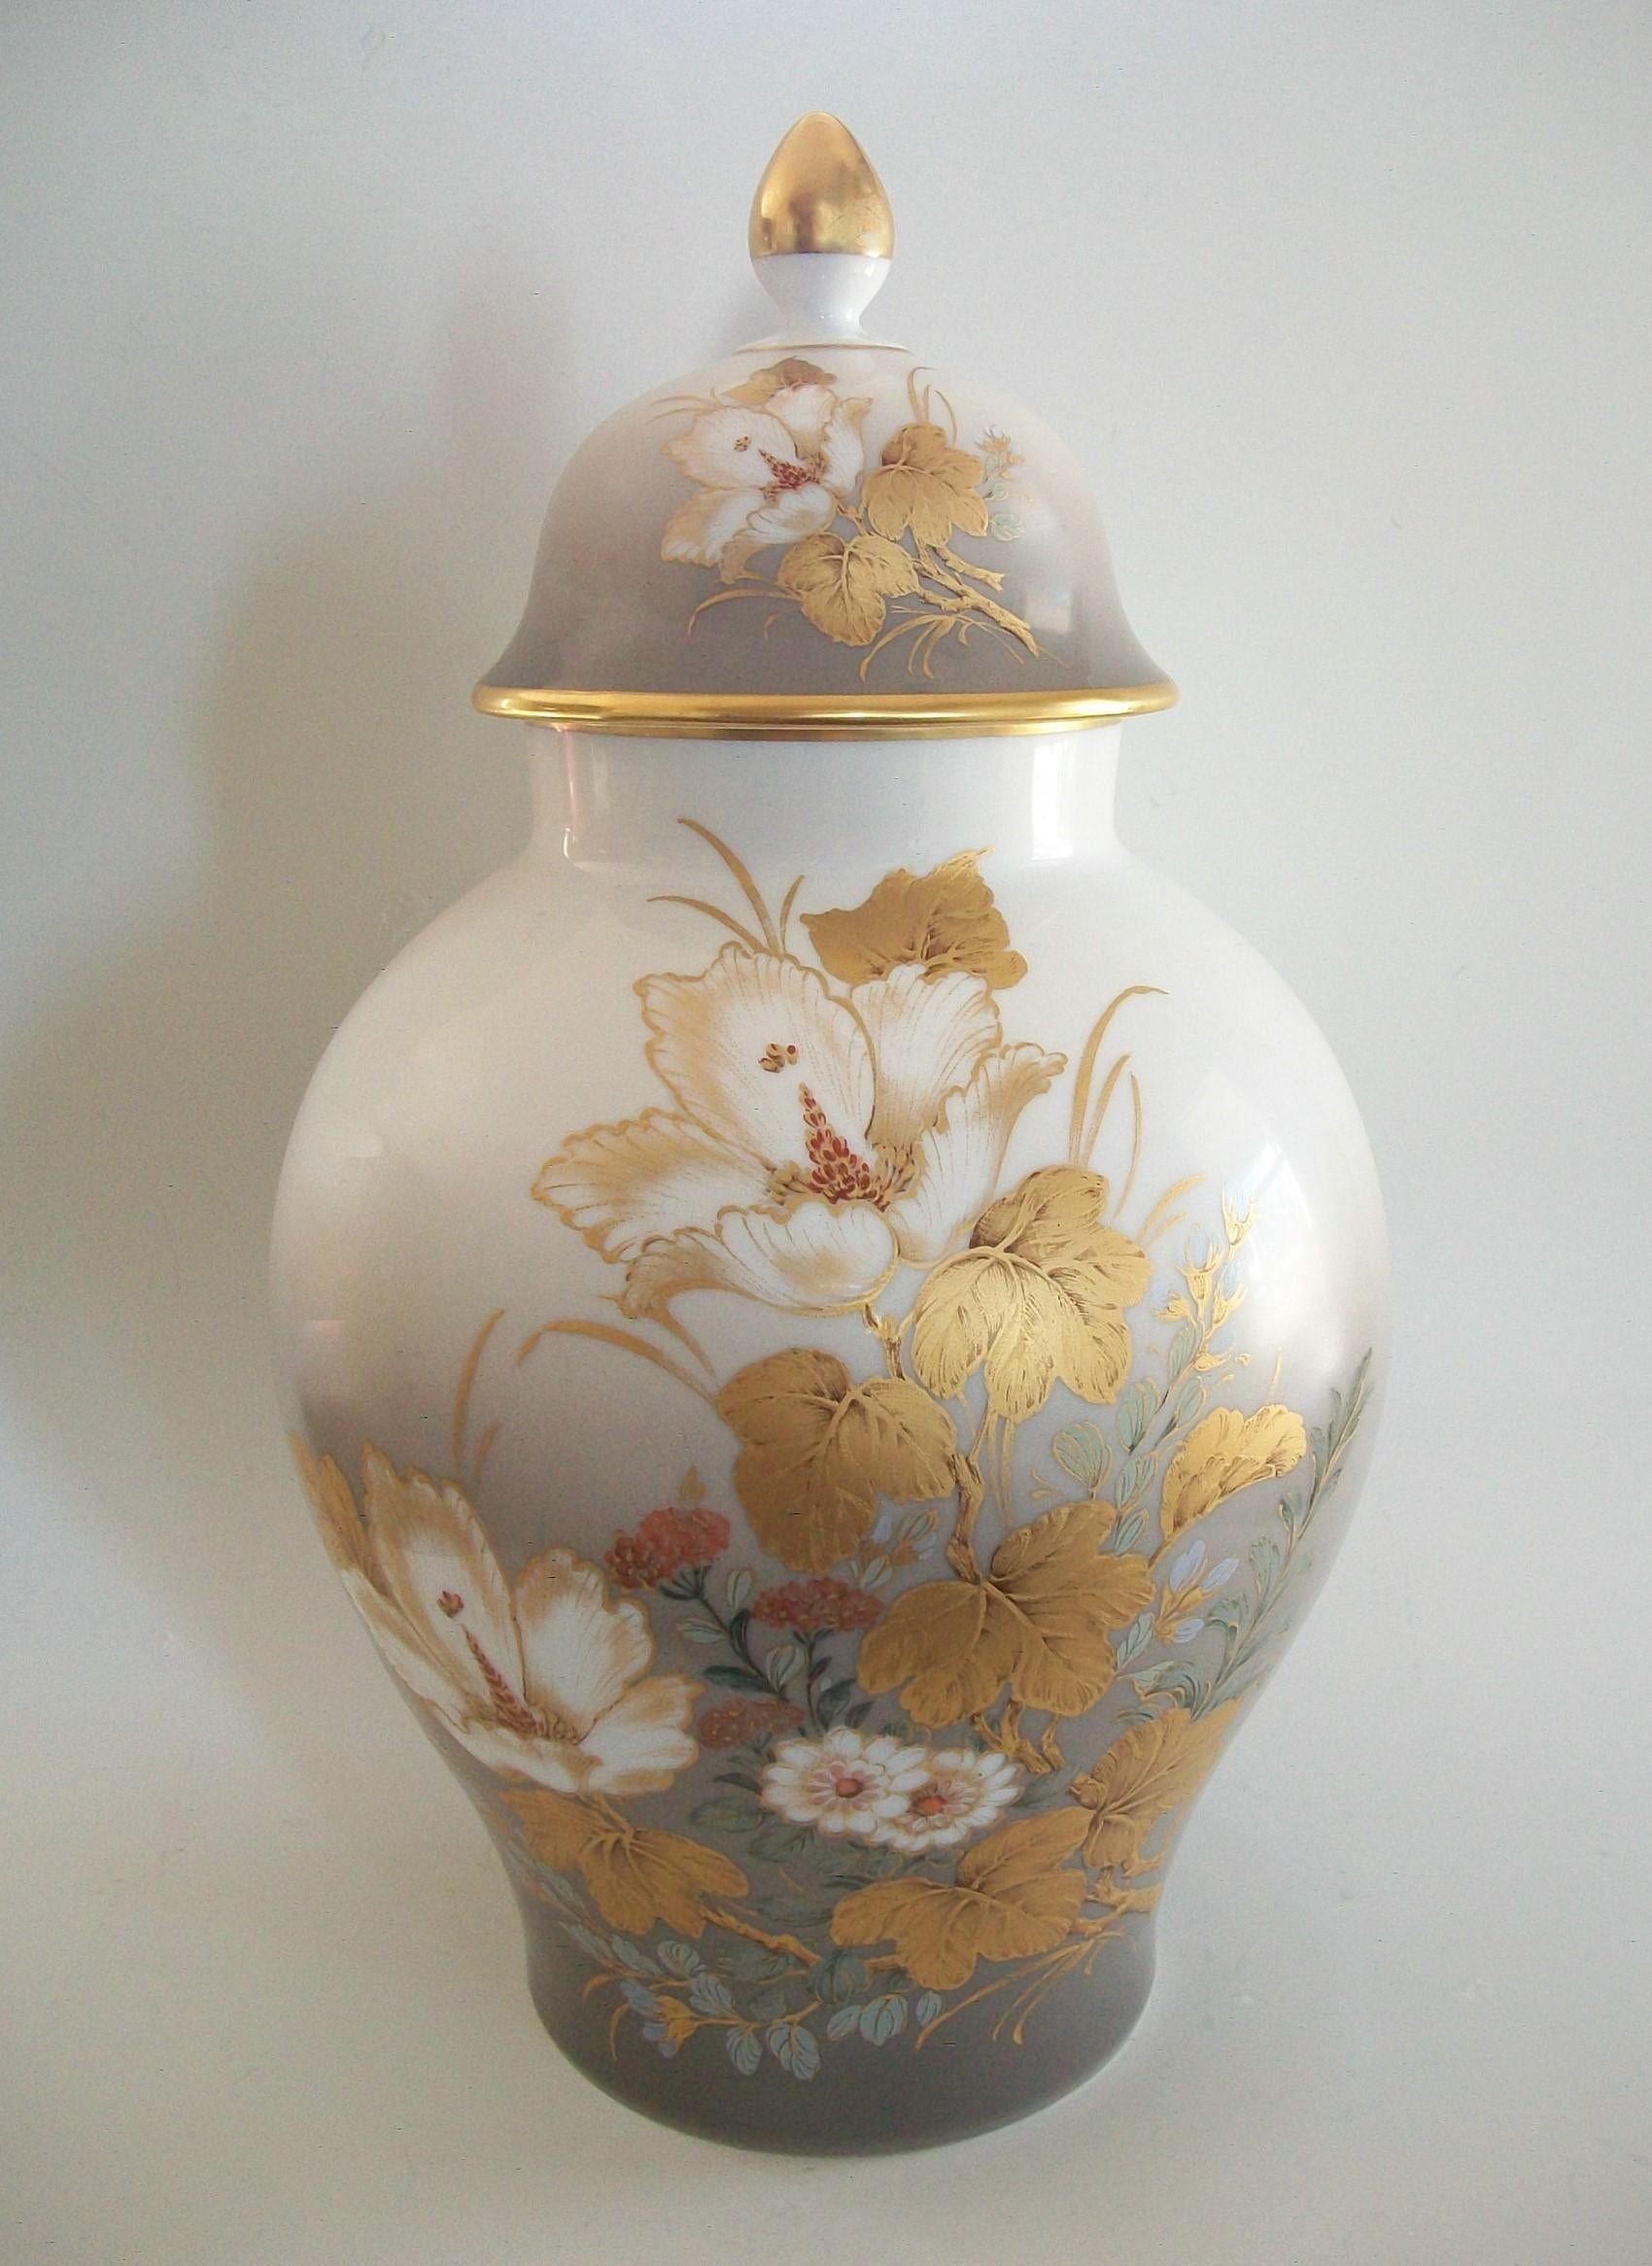 KAISER (manufacturer) - K. Nossek (designer) - Desiree (product line) - vintage fine porcelain urn and cover - featuring shaded enamels and floral decoration with gilded highlights all on a white ground - floral decoration to the back and lid -